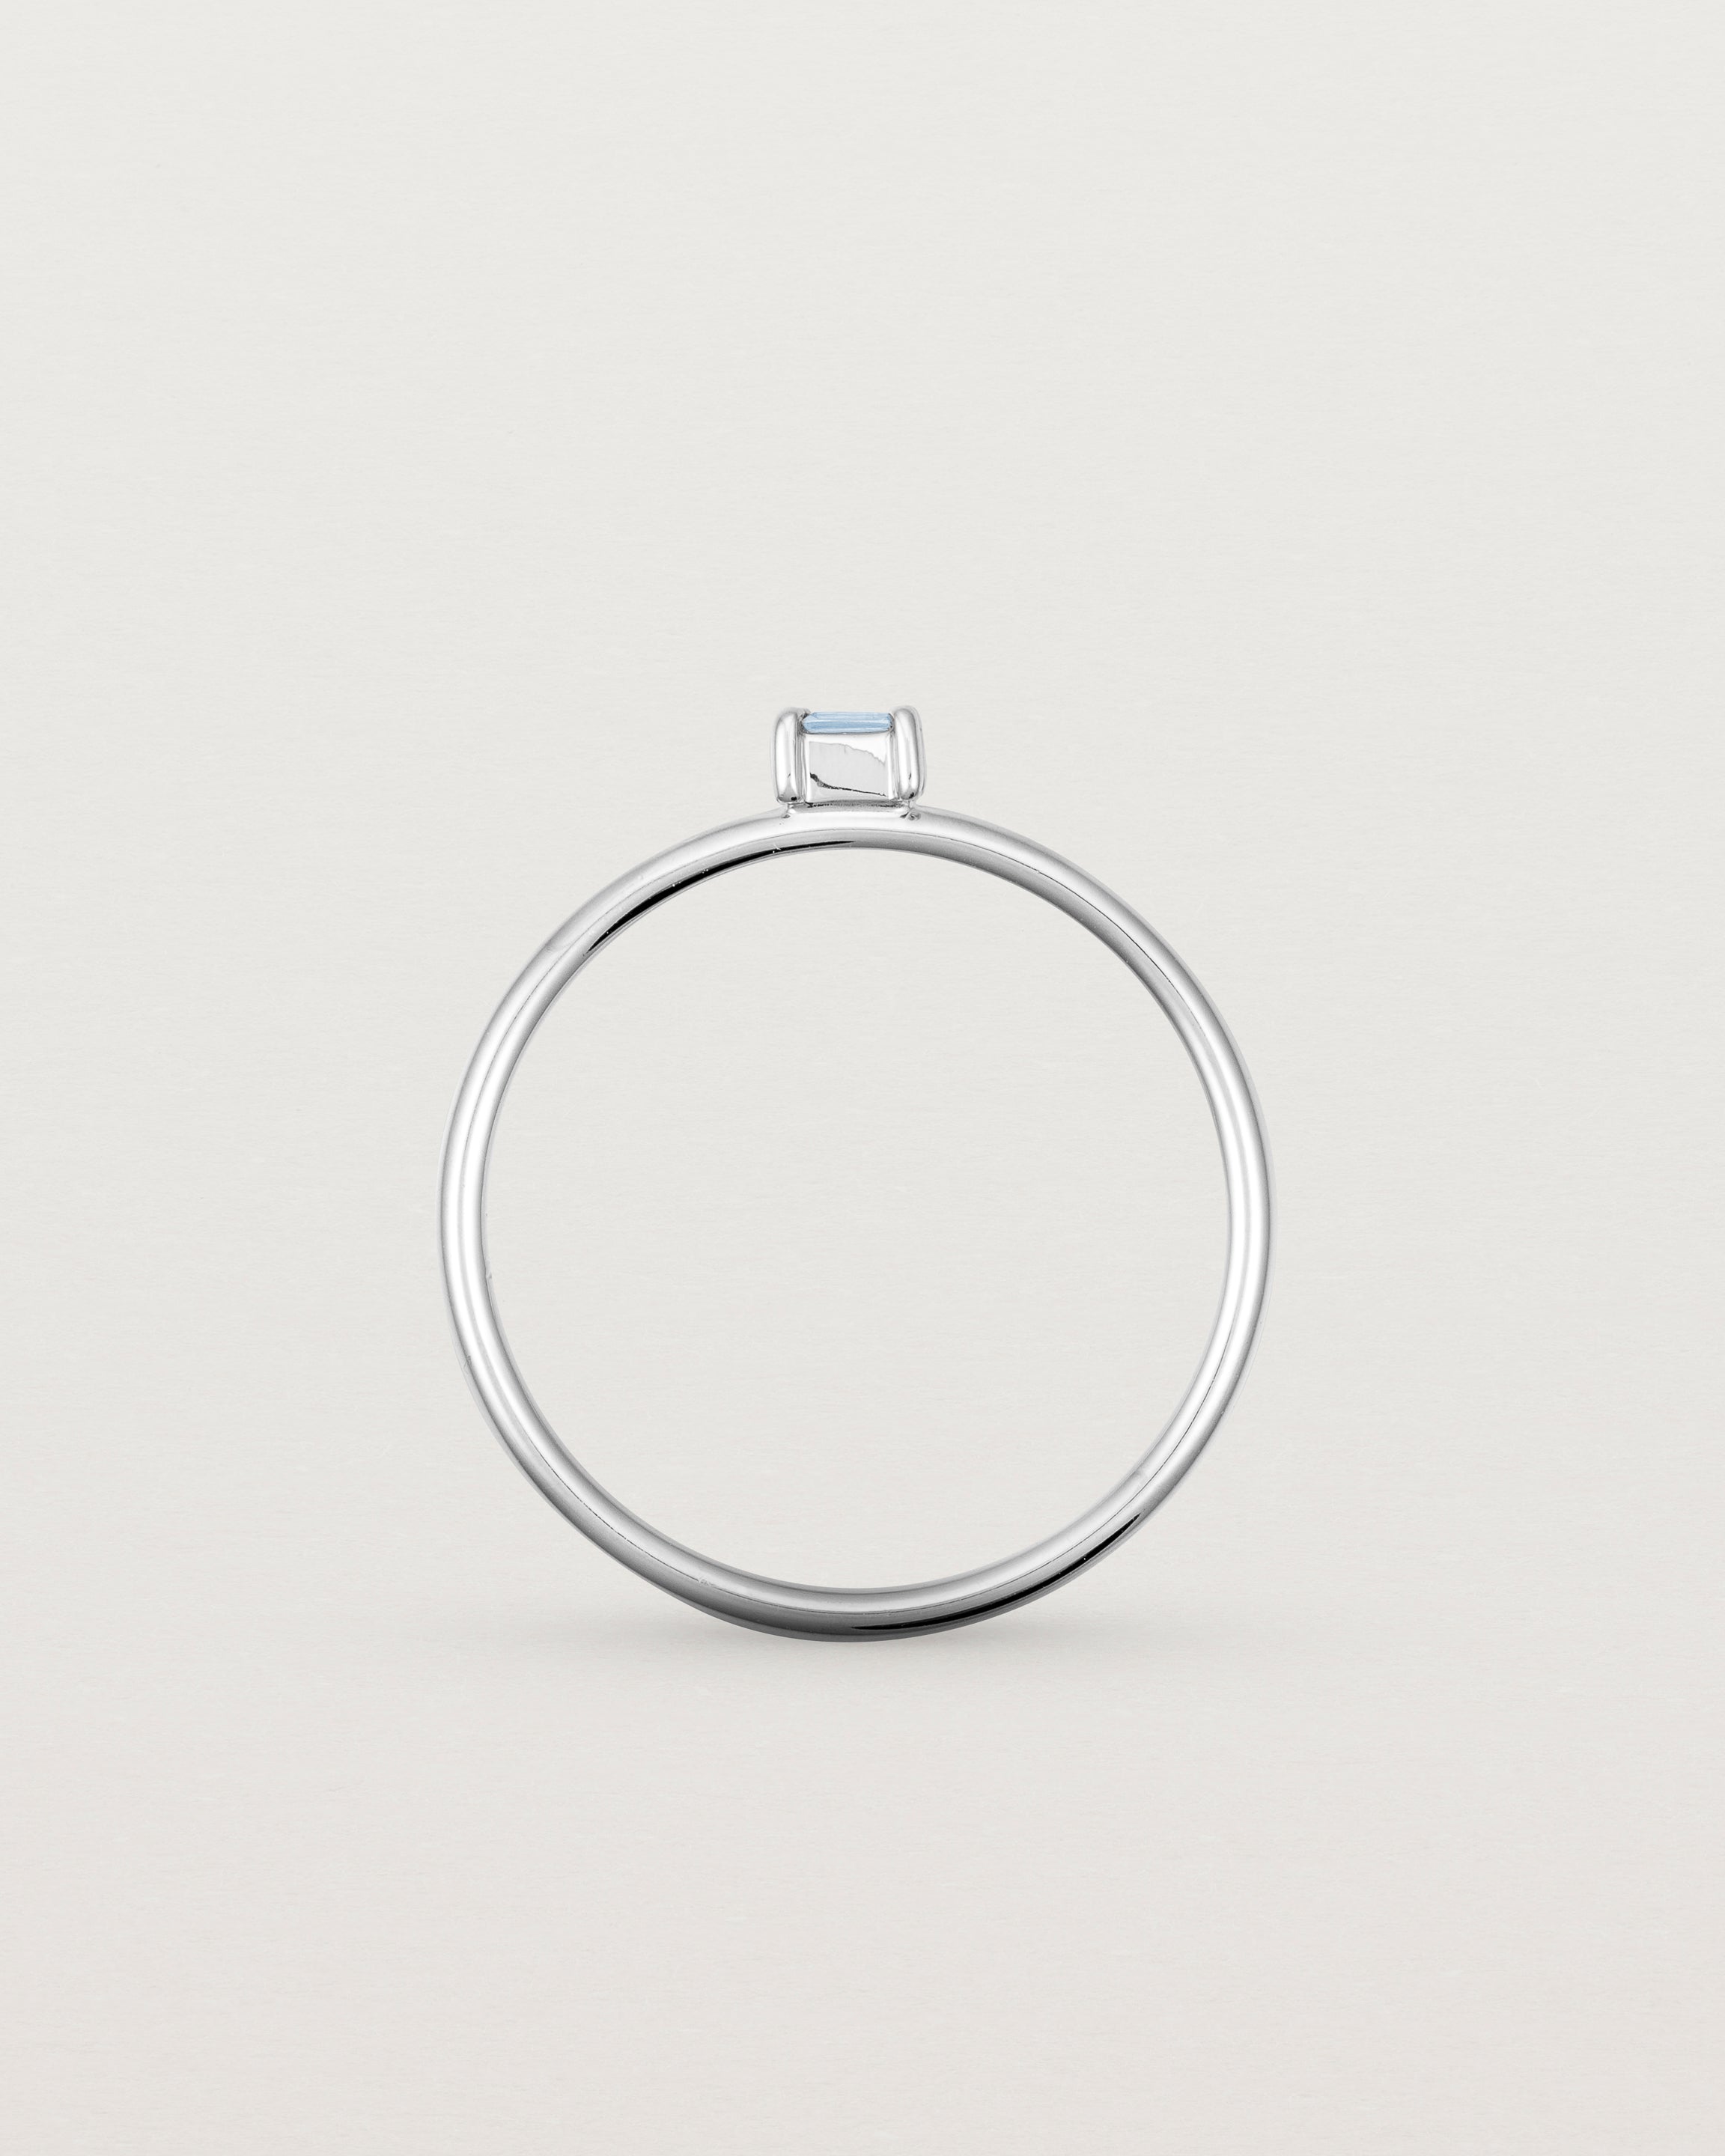 A fine silver ring featuring an emerald cut pale blue sapphire set in the centre of the band